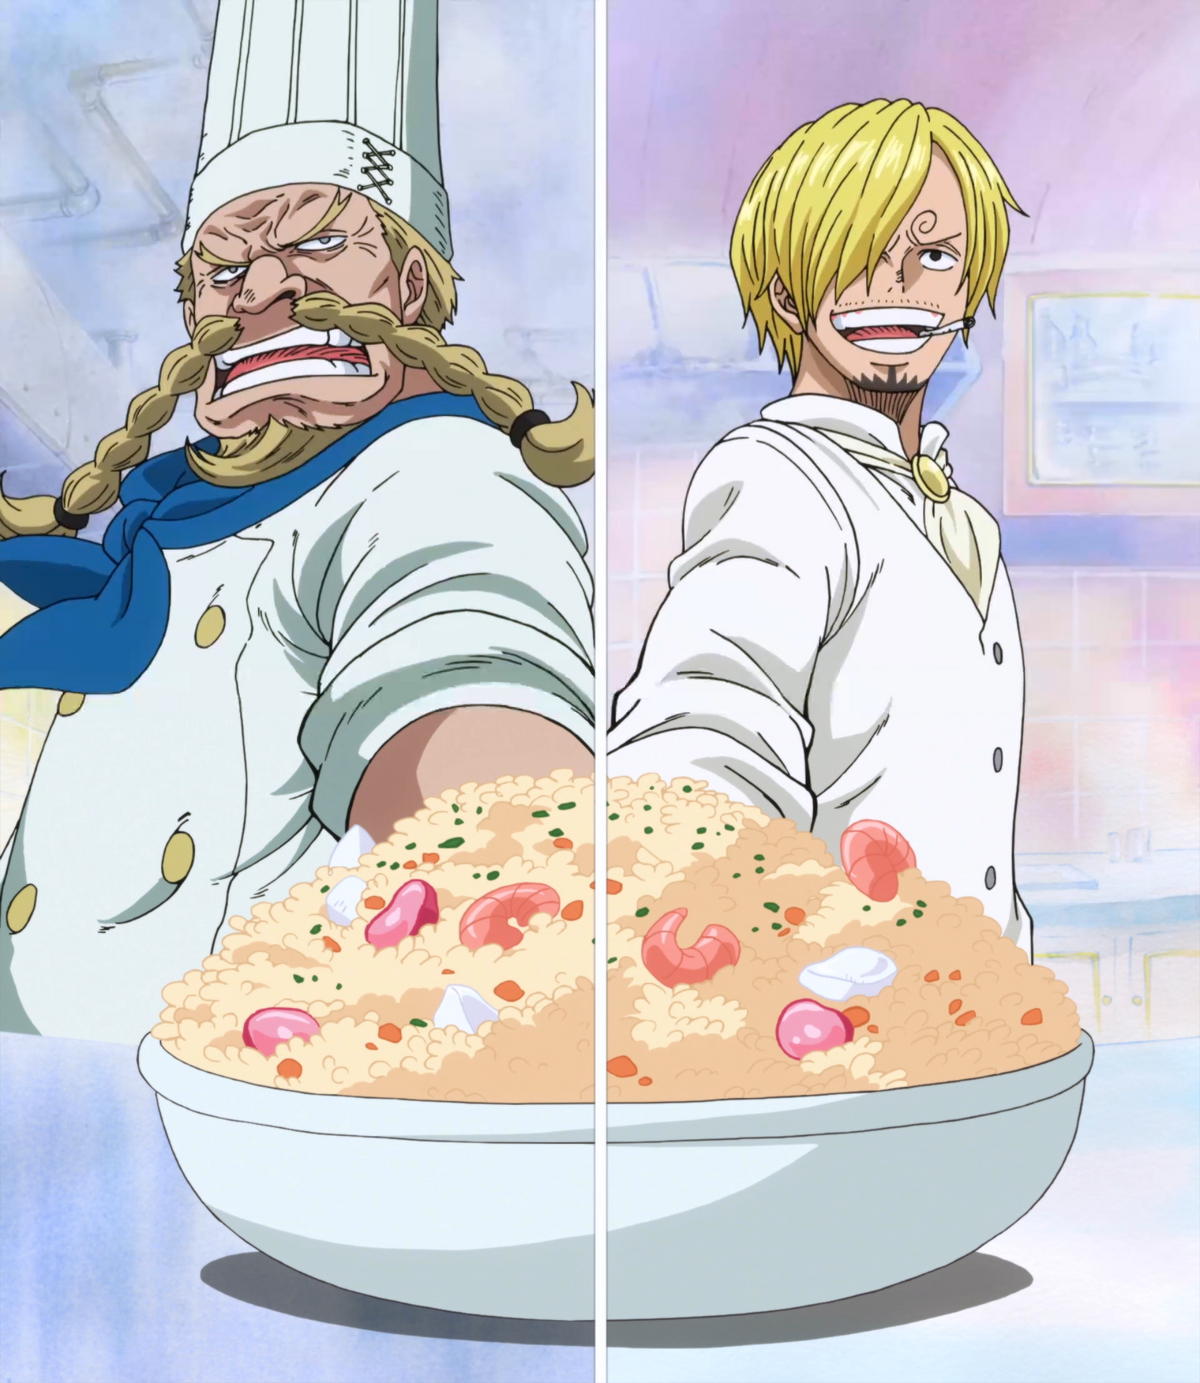 One Piece Moments - They fixed this color spread mistake in onepiece volume  107 from cocking❌ 😓 to cooking ✓ 🤦 No more Sanji will be the COC  King theory 🤭 ©️ pewpiece #onepiece